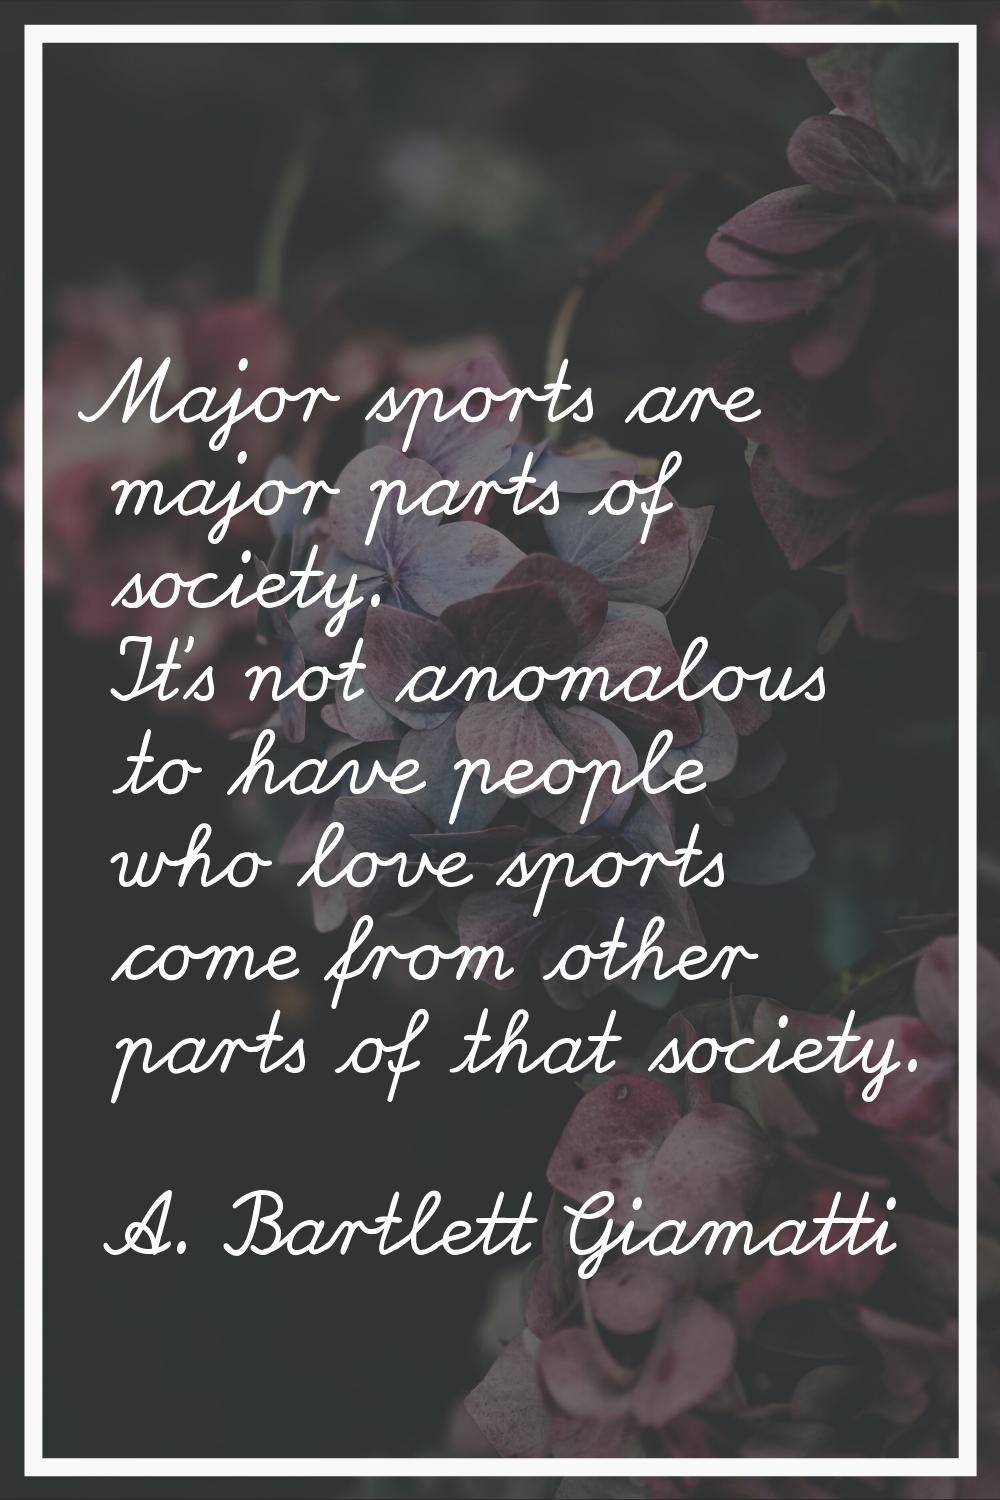 Major sports are major parts of society. It's not anomalous to have people who love sports come fro